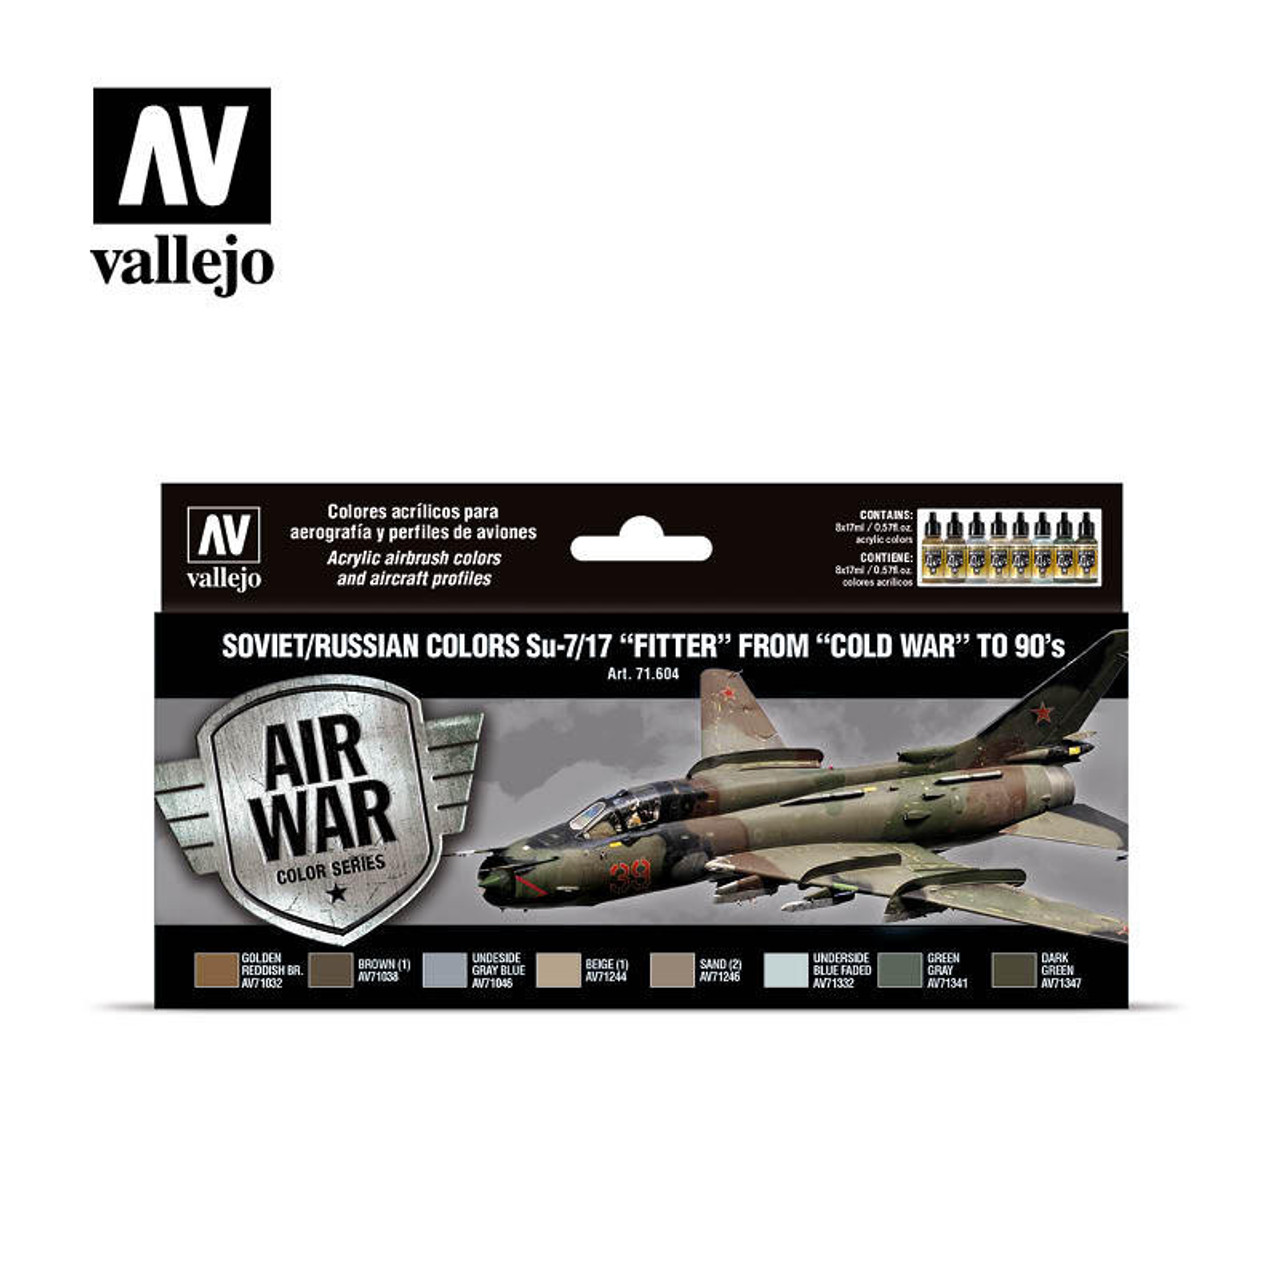 VJ71604 Vallejo Paint 17ml Bottle Soviet/Russian Su7/17 Fitter from Cold War to 90s Model Air War Paint Set 8 Colors MMD Squadron